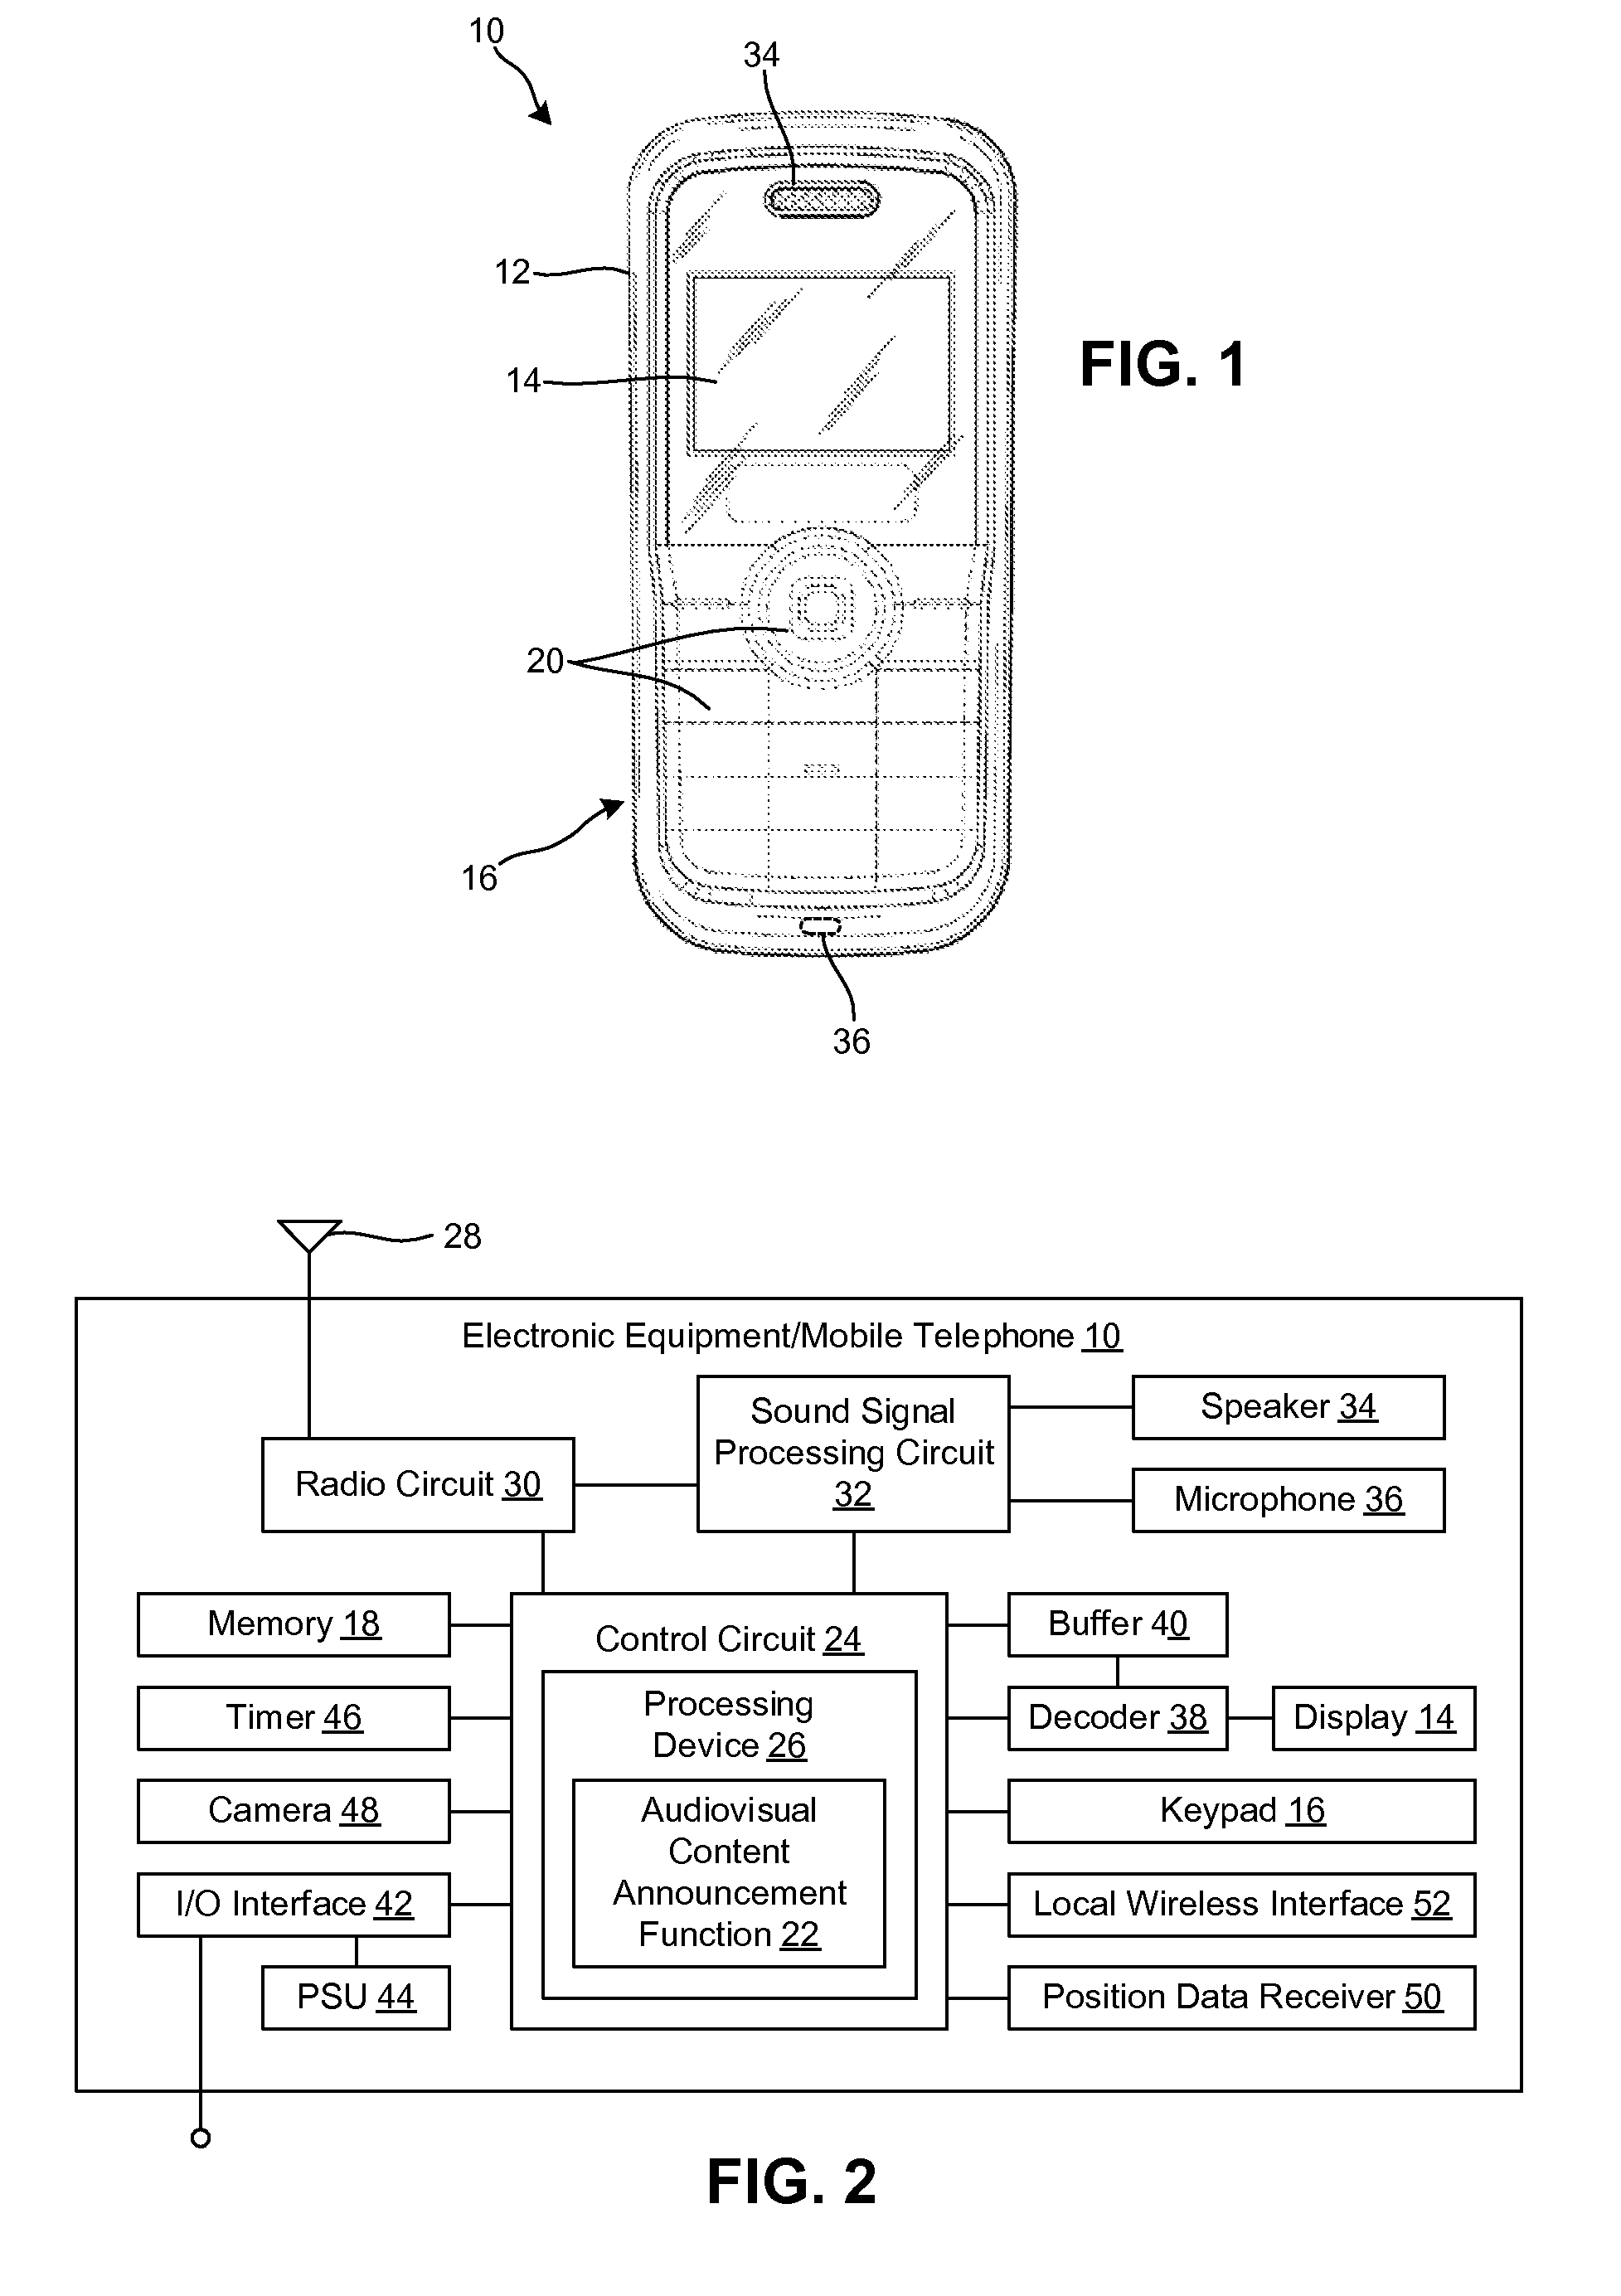 Method and system for announcing audio and video content to a user of a mobile radio terminal